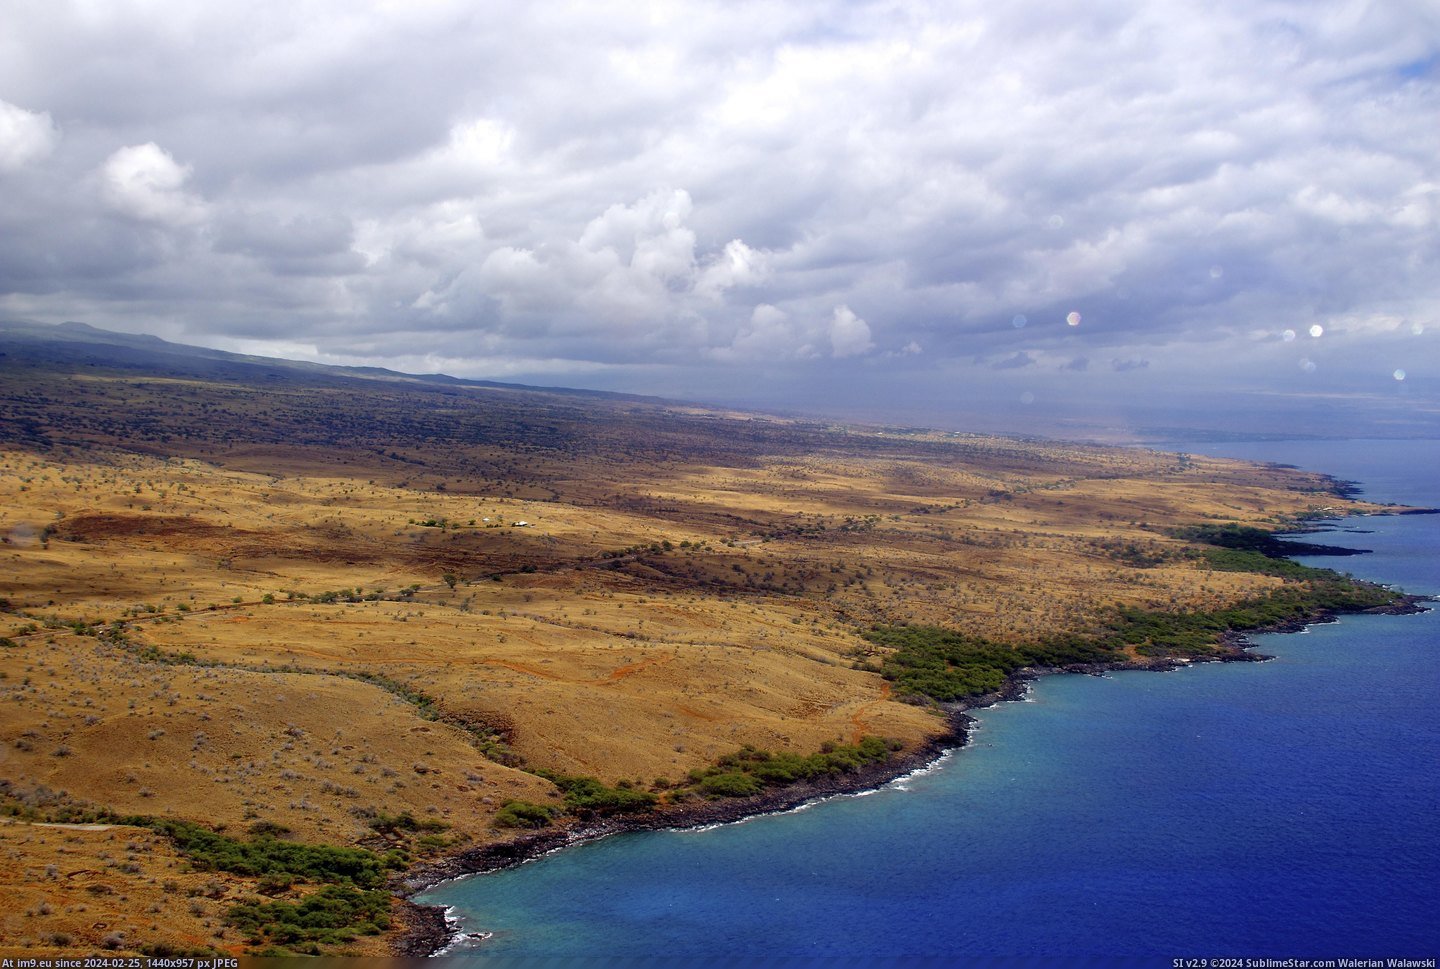 #One #Big #World #Hawaii #Climates #Island #Vol #Desert [Earthporn] Hawaii's Big Island has one of the most diverse climates in the world. 1-3 dense rainforest, 1-3 desert, and 1-3 vol Pic. (Изображение из альбом My r/EARTHPORN favs))